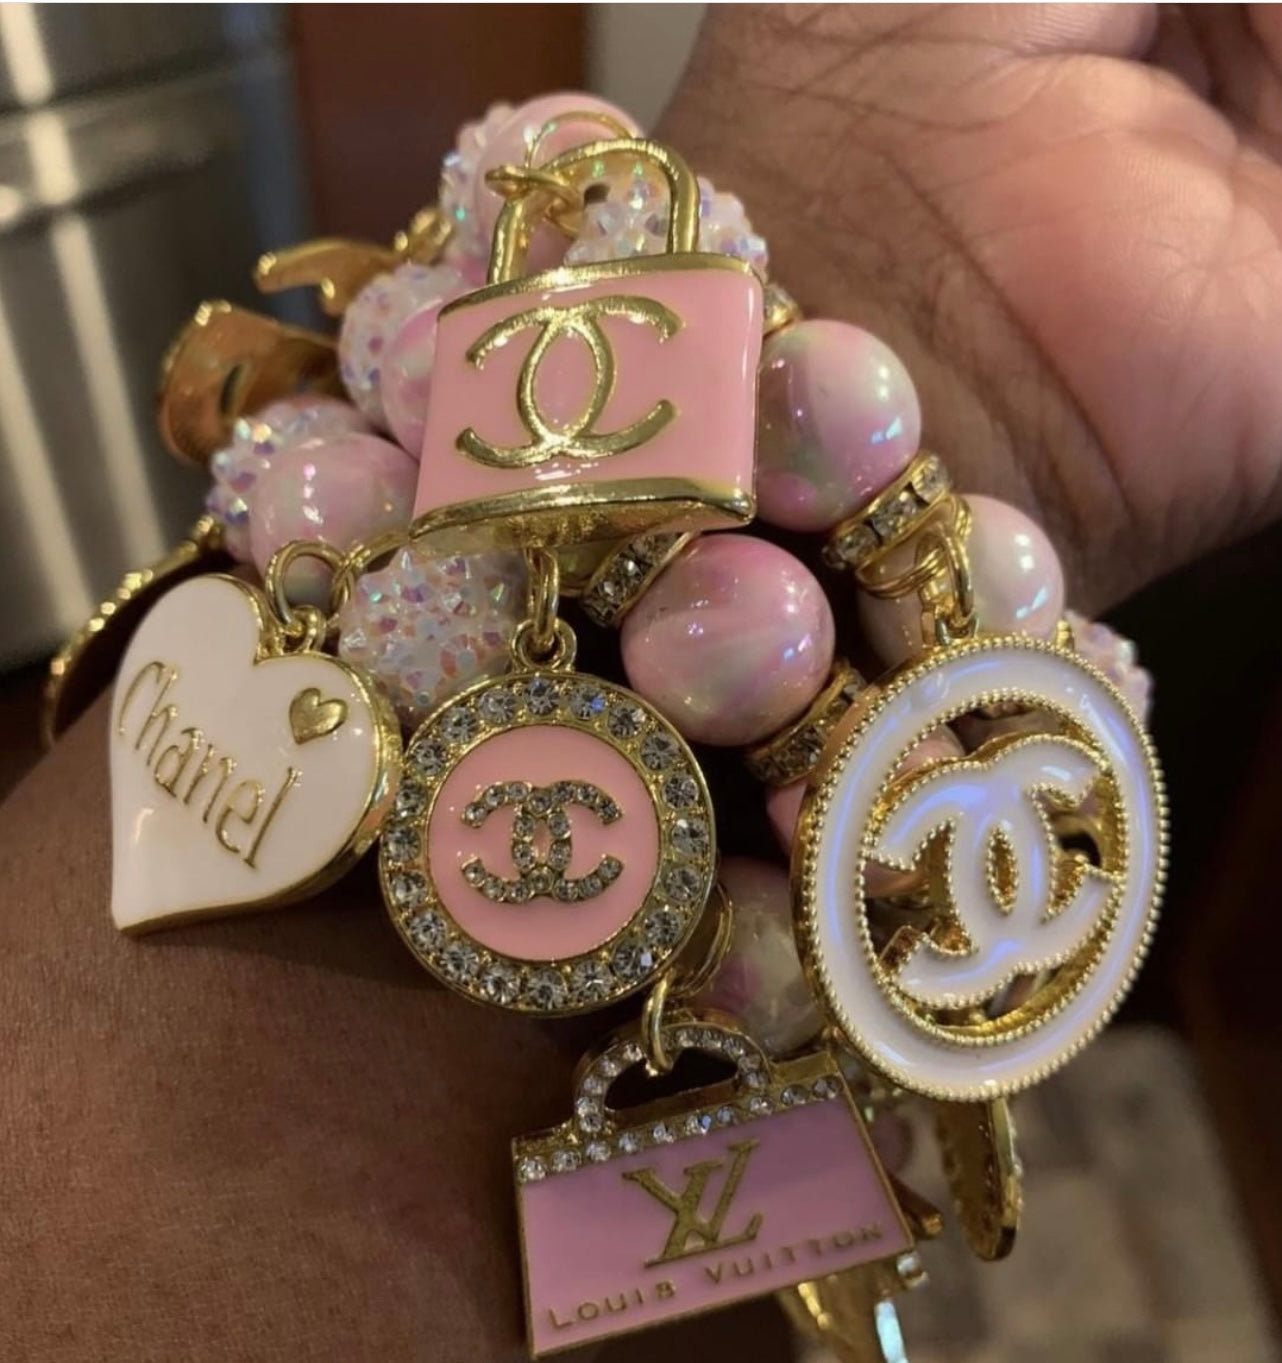 Bling Apple Watch face paired with pandora bracelets   Apple watch bands  women Apple watch fashion Apple watch bracelets